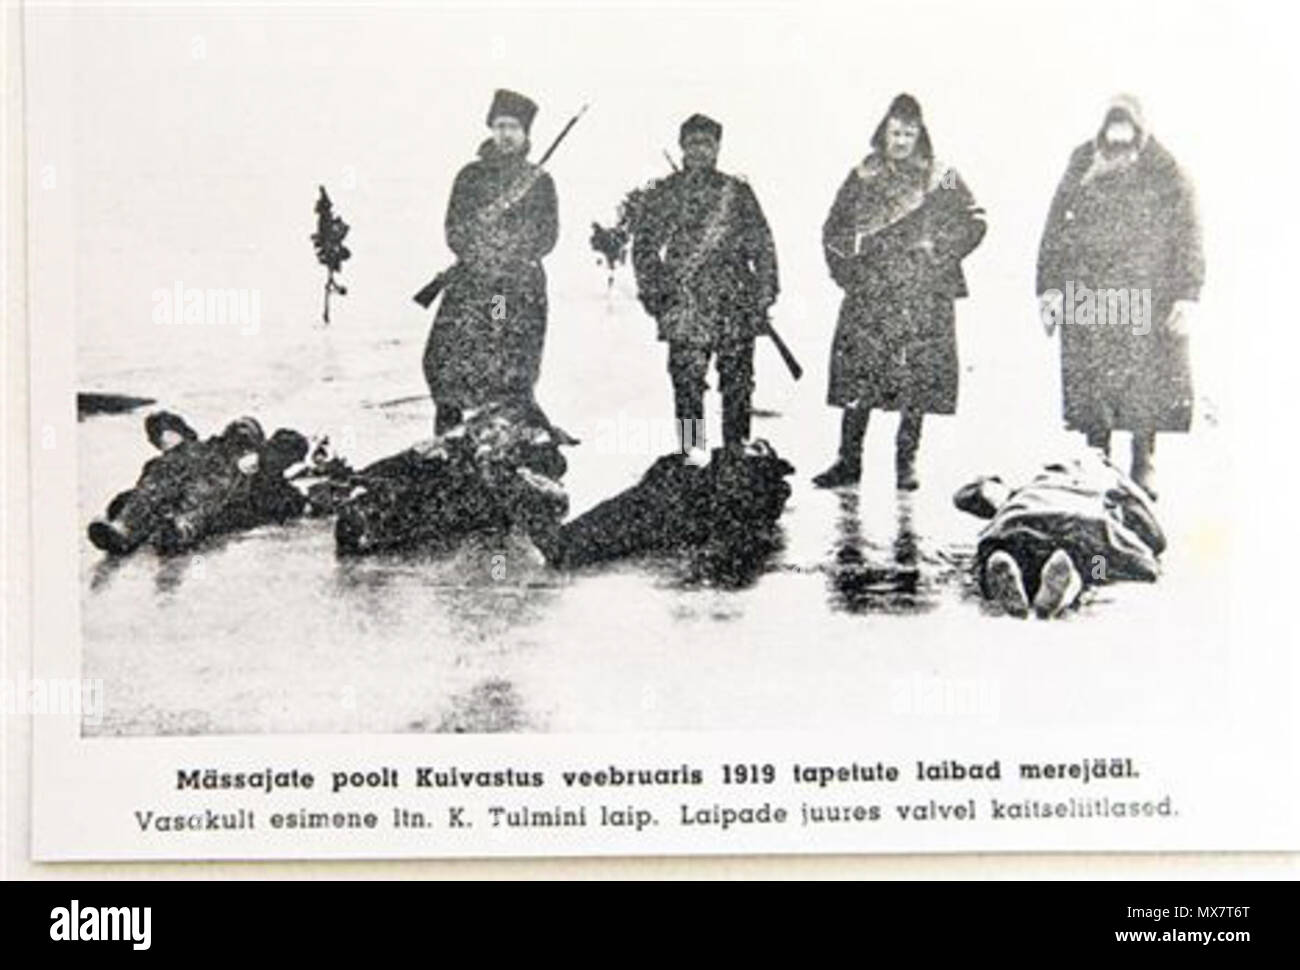 . English: Dead Estonian soldiers killed by rebels in Muhu, February 16 1919 during the first days of Saarenmaa rebellion. Bodies guarded by Kaitseliit paramilitary soldiers. 25 January 2012. Unknown 197 Estonian soldiers killed by rebels in Saarenmaa Stock Photo